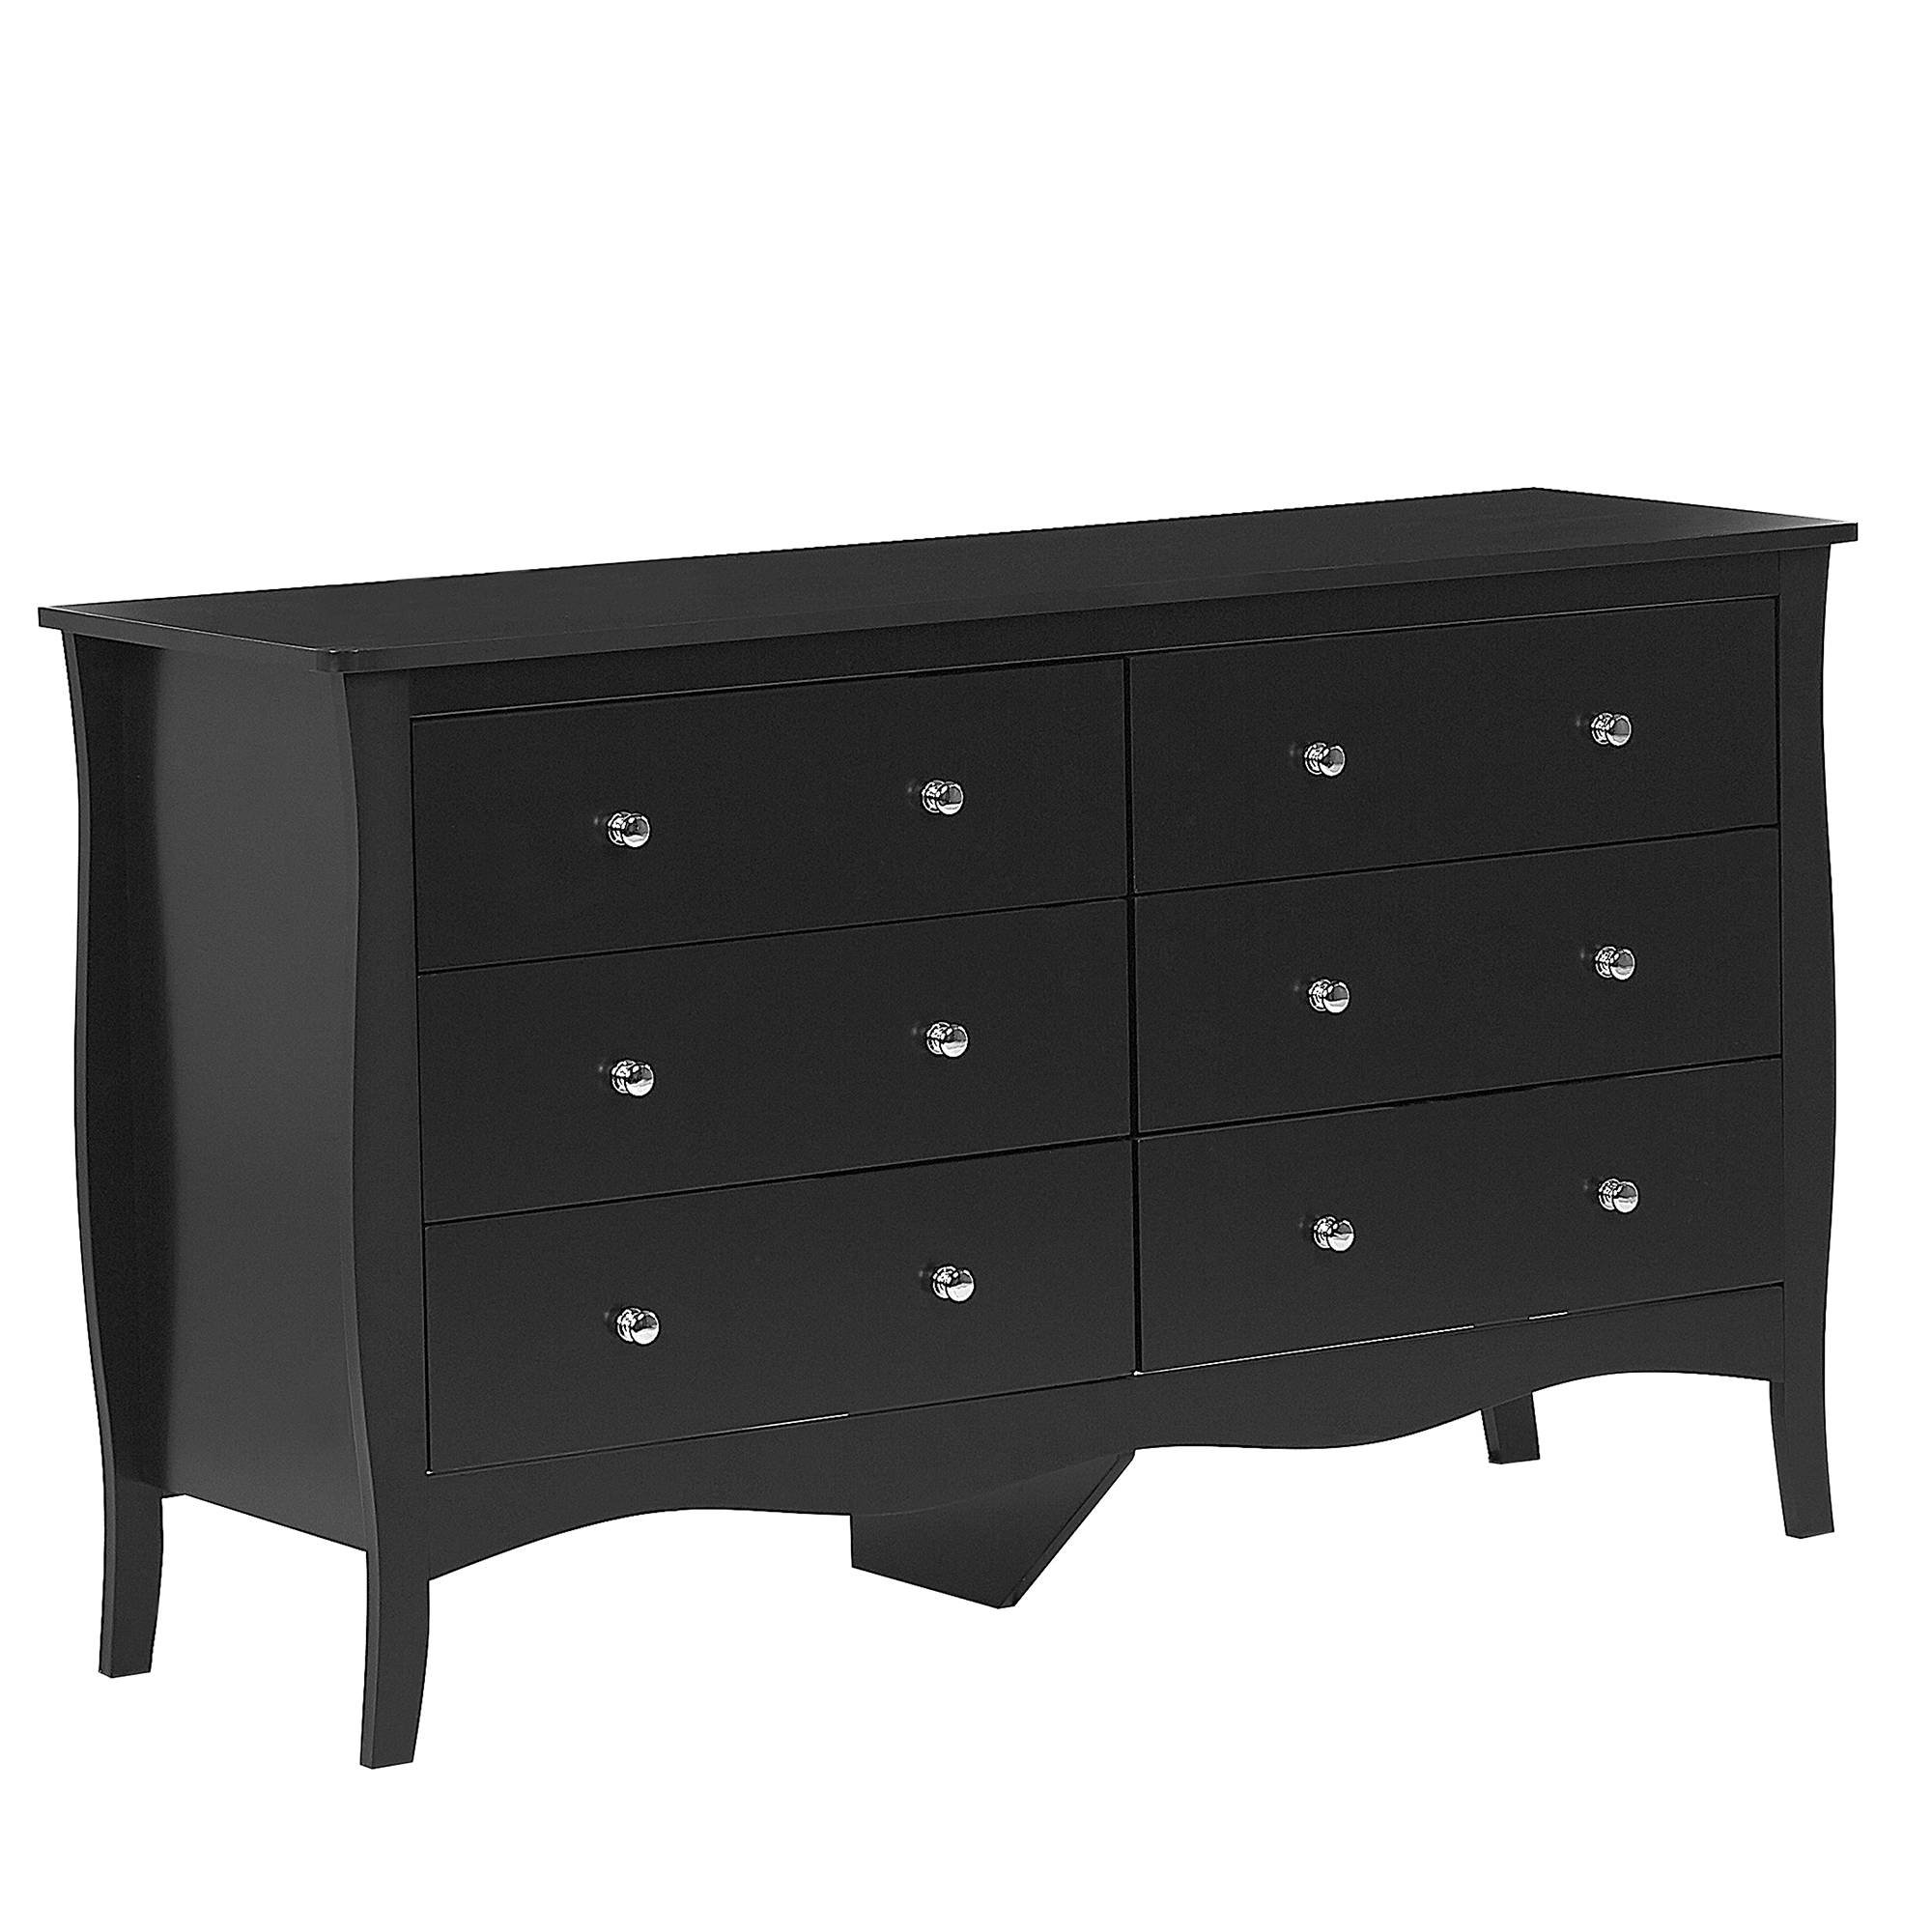 Beliani Chest of Drawers Black Sideboard with 6 Drawers 75 x 130 cm Living Room Bedroom Hallway Storage Cabinet Modern French Style Material:MDF Size:40x75x130